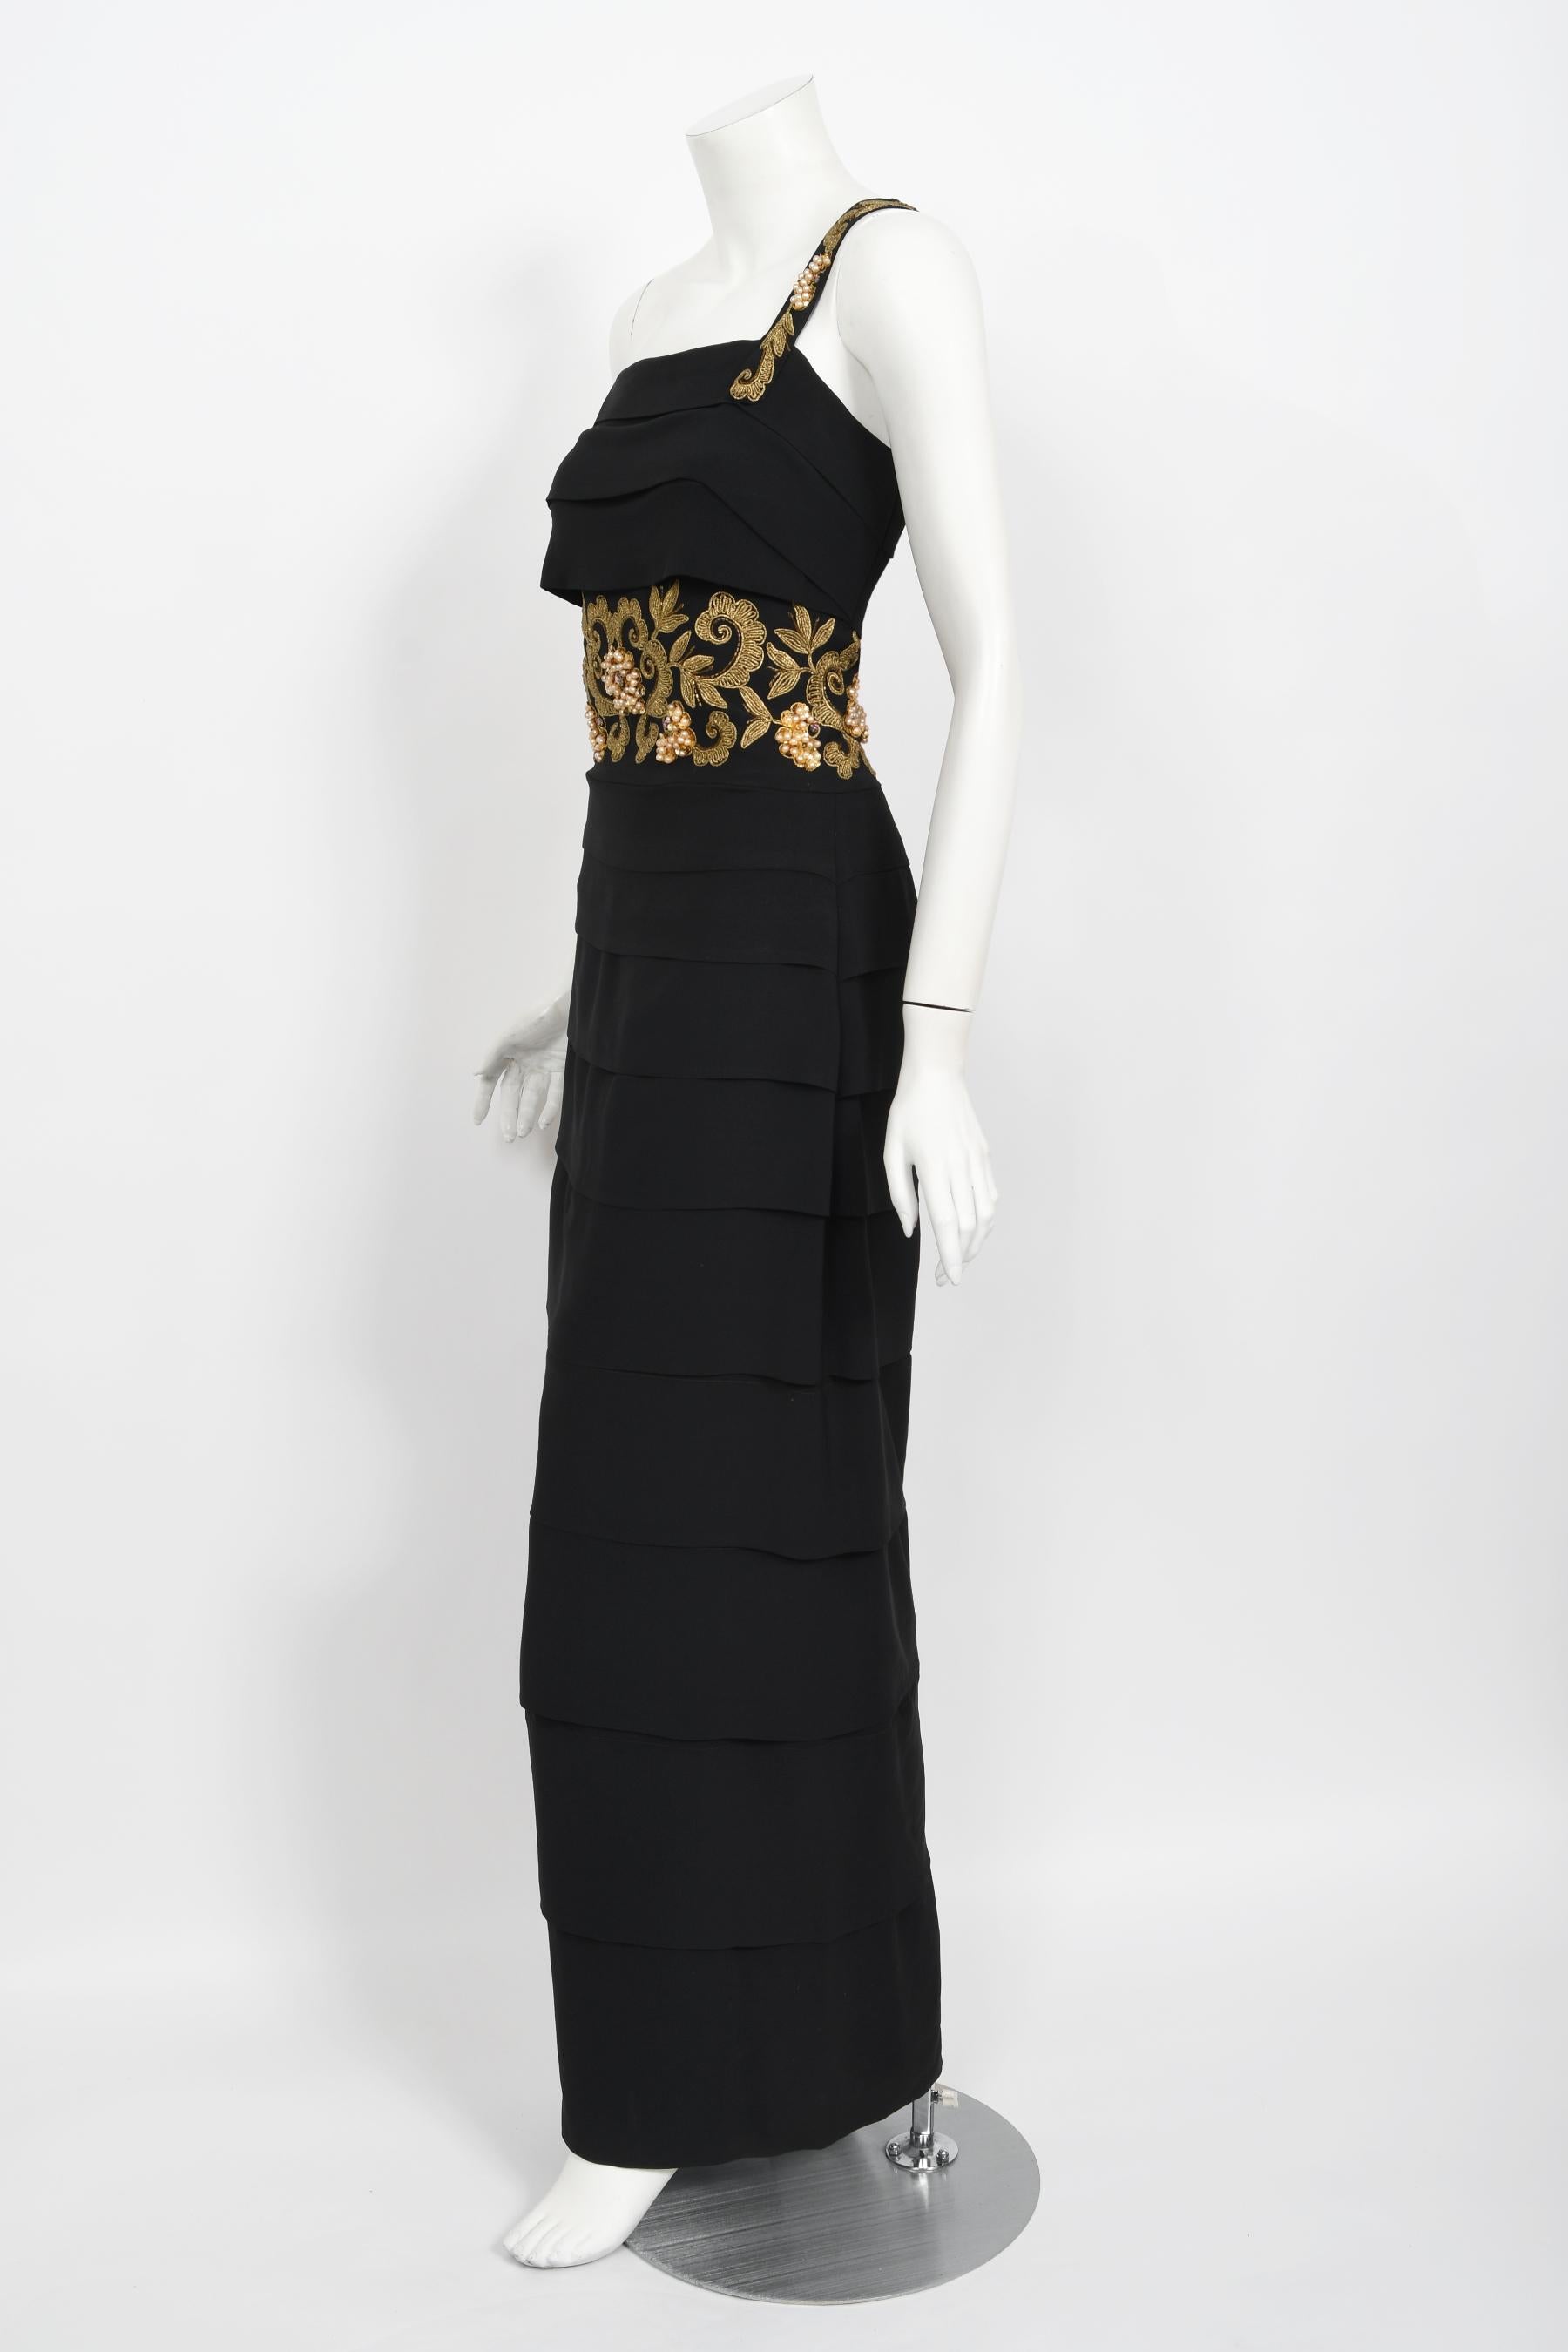 Vintage 1940s Metallic Gold Embroidered Beaded Black Crepe Tiered Hourglass Gown 2